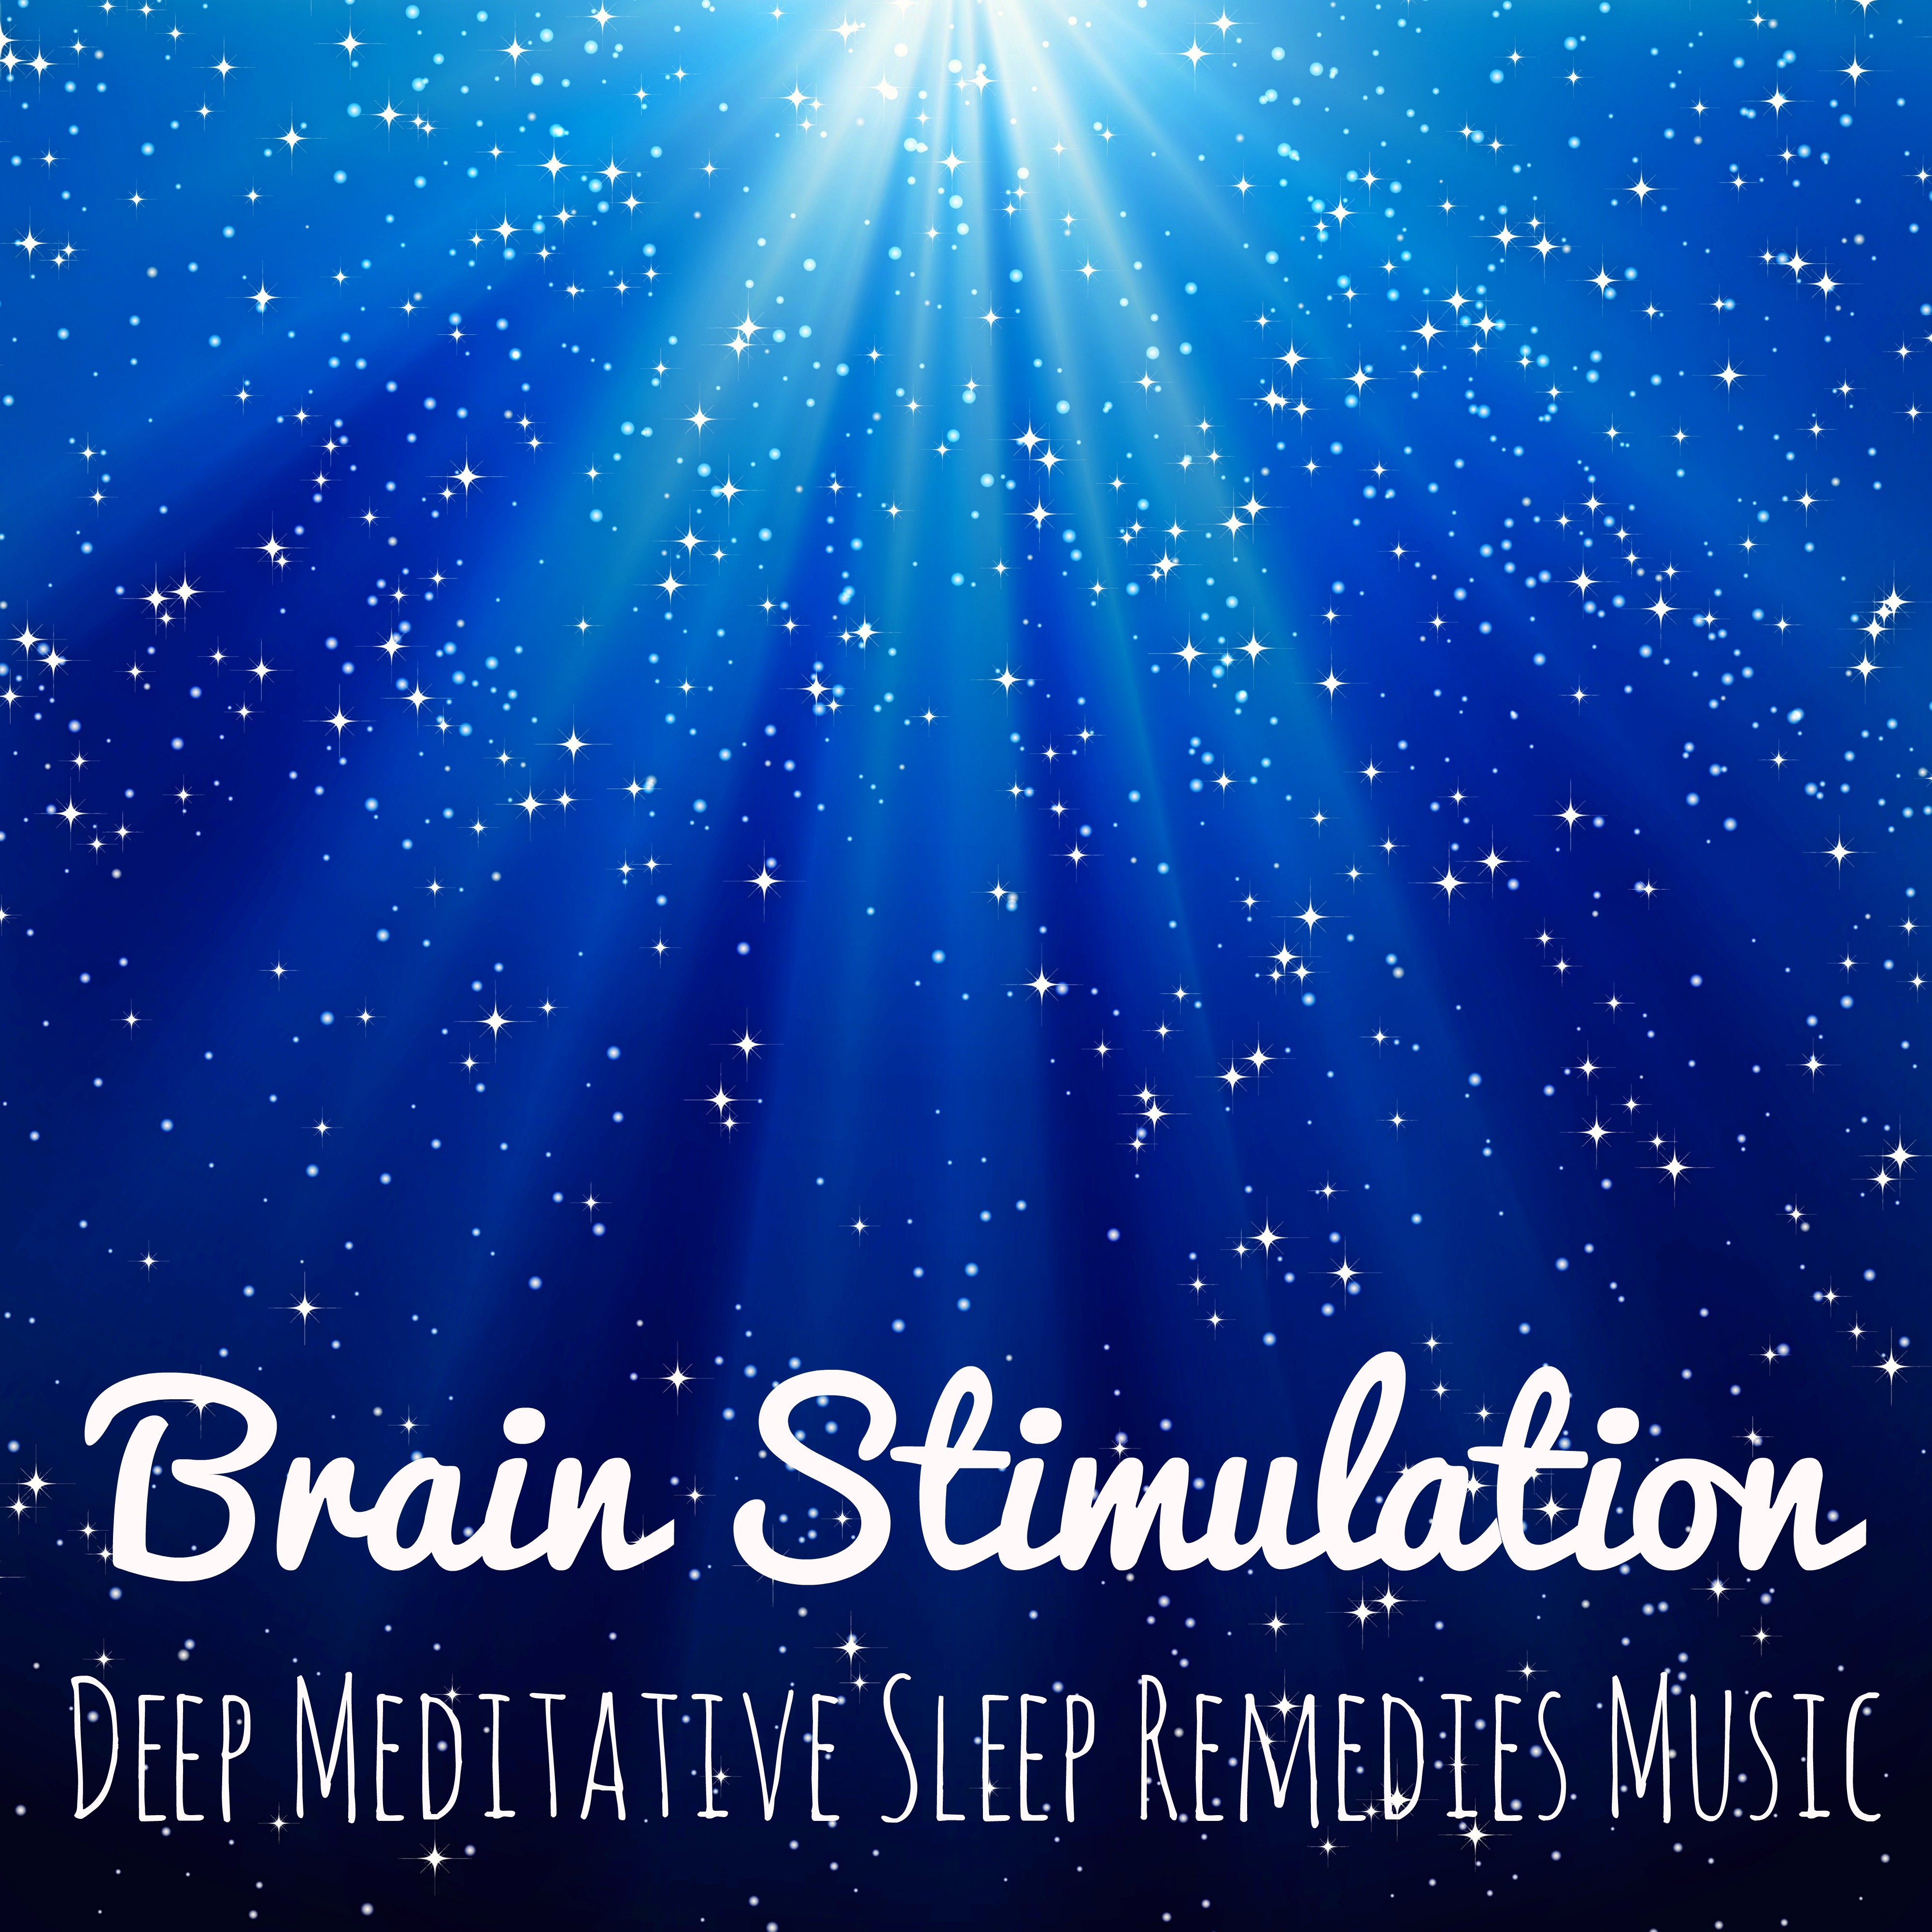 Brain Stimulation – Deep Meditative Sleep Remedies Music with Healing New Age Instrumental and Natural Sounds